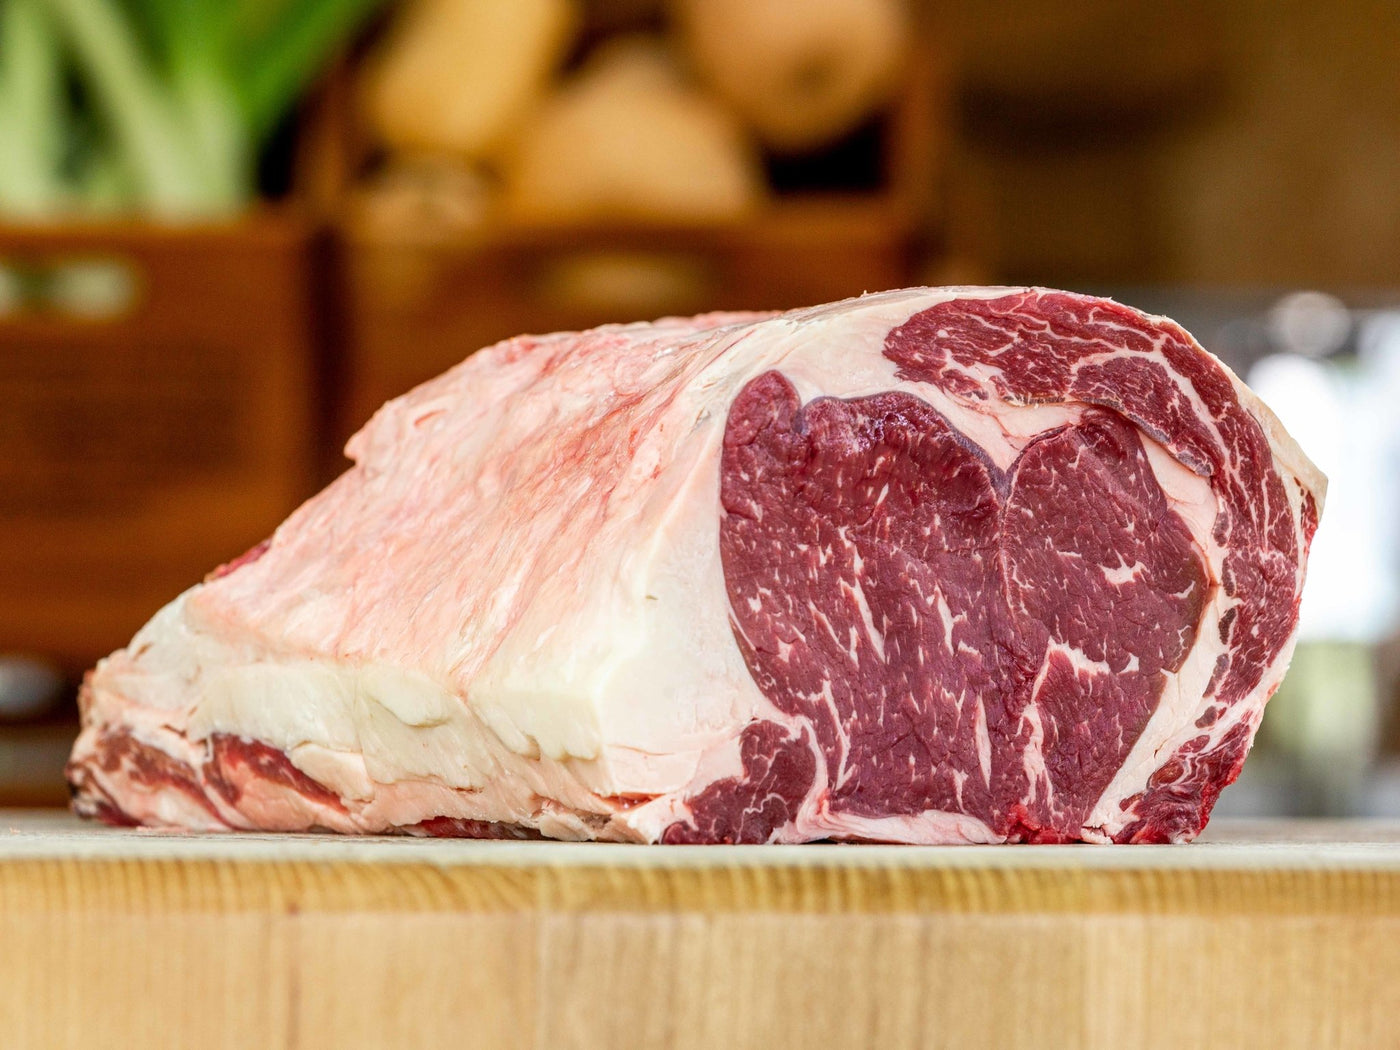 Grass Fed, Dry-Aged Ribeye Steak - Beef - Thomas Joseph Butchery - Ethical Dry-Aged Meat The Best Steak UK Thomas Joseph Butchery